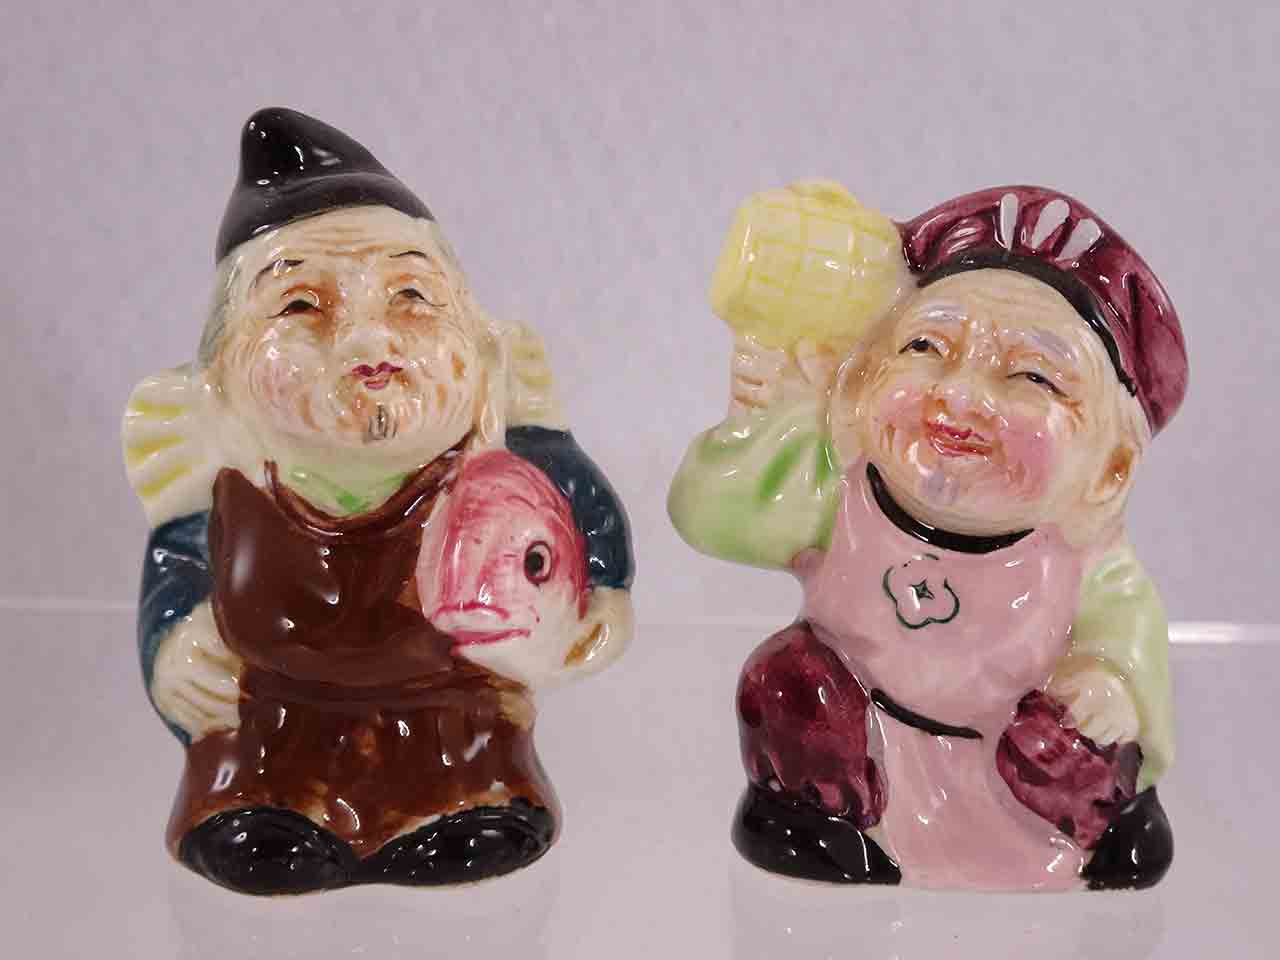 Little Asian people salt and pepper shakers